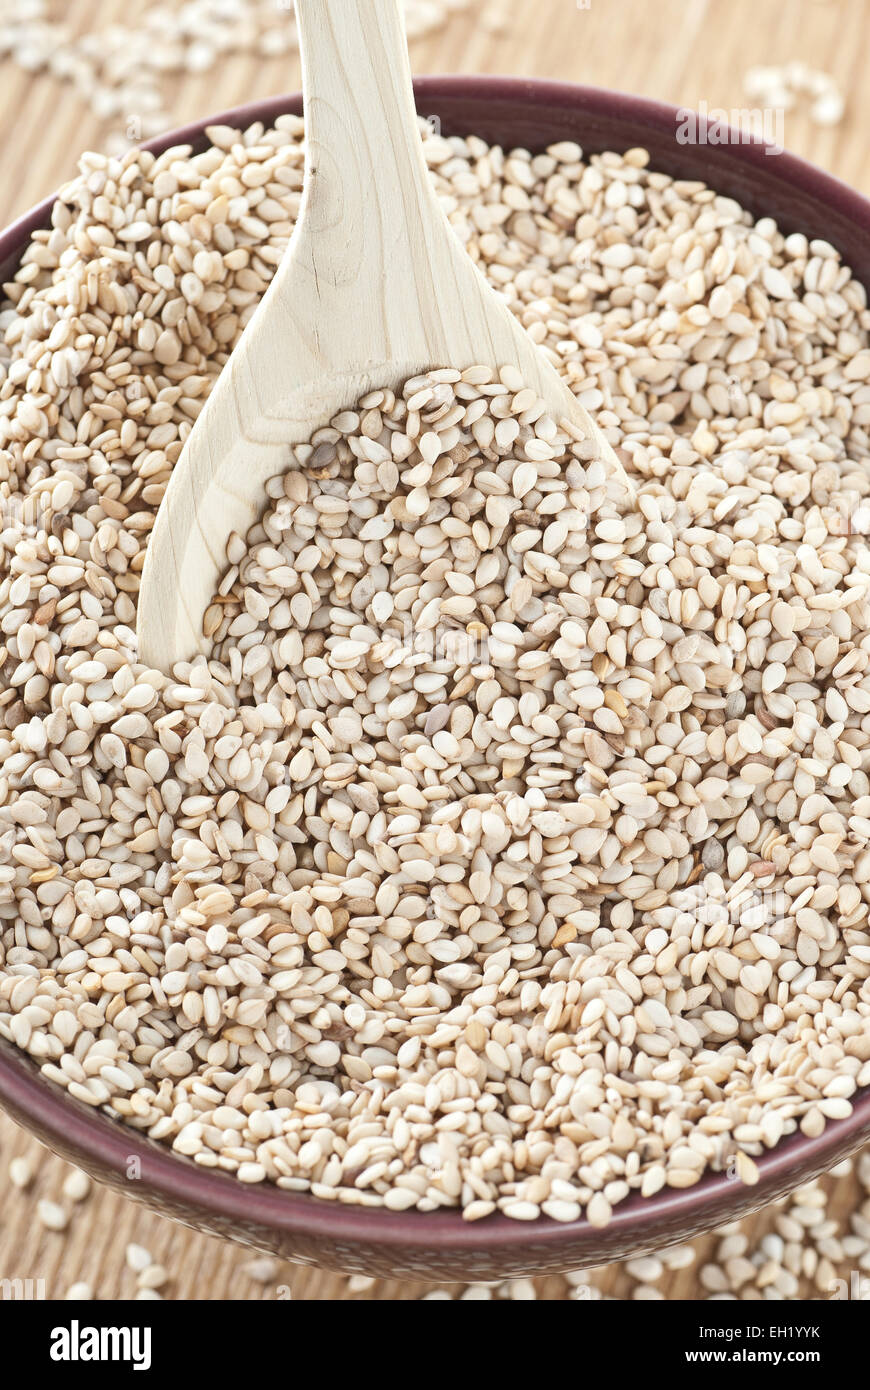 Sesame seeds in a bowl. Stock Photo